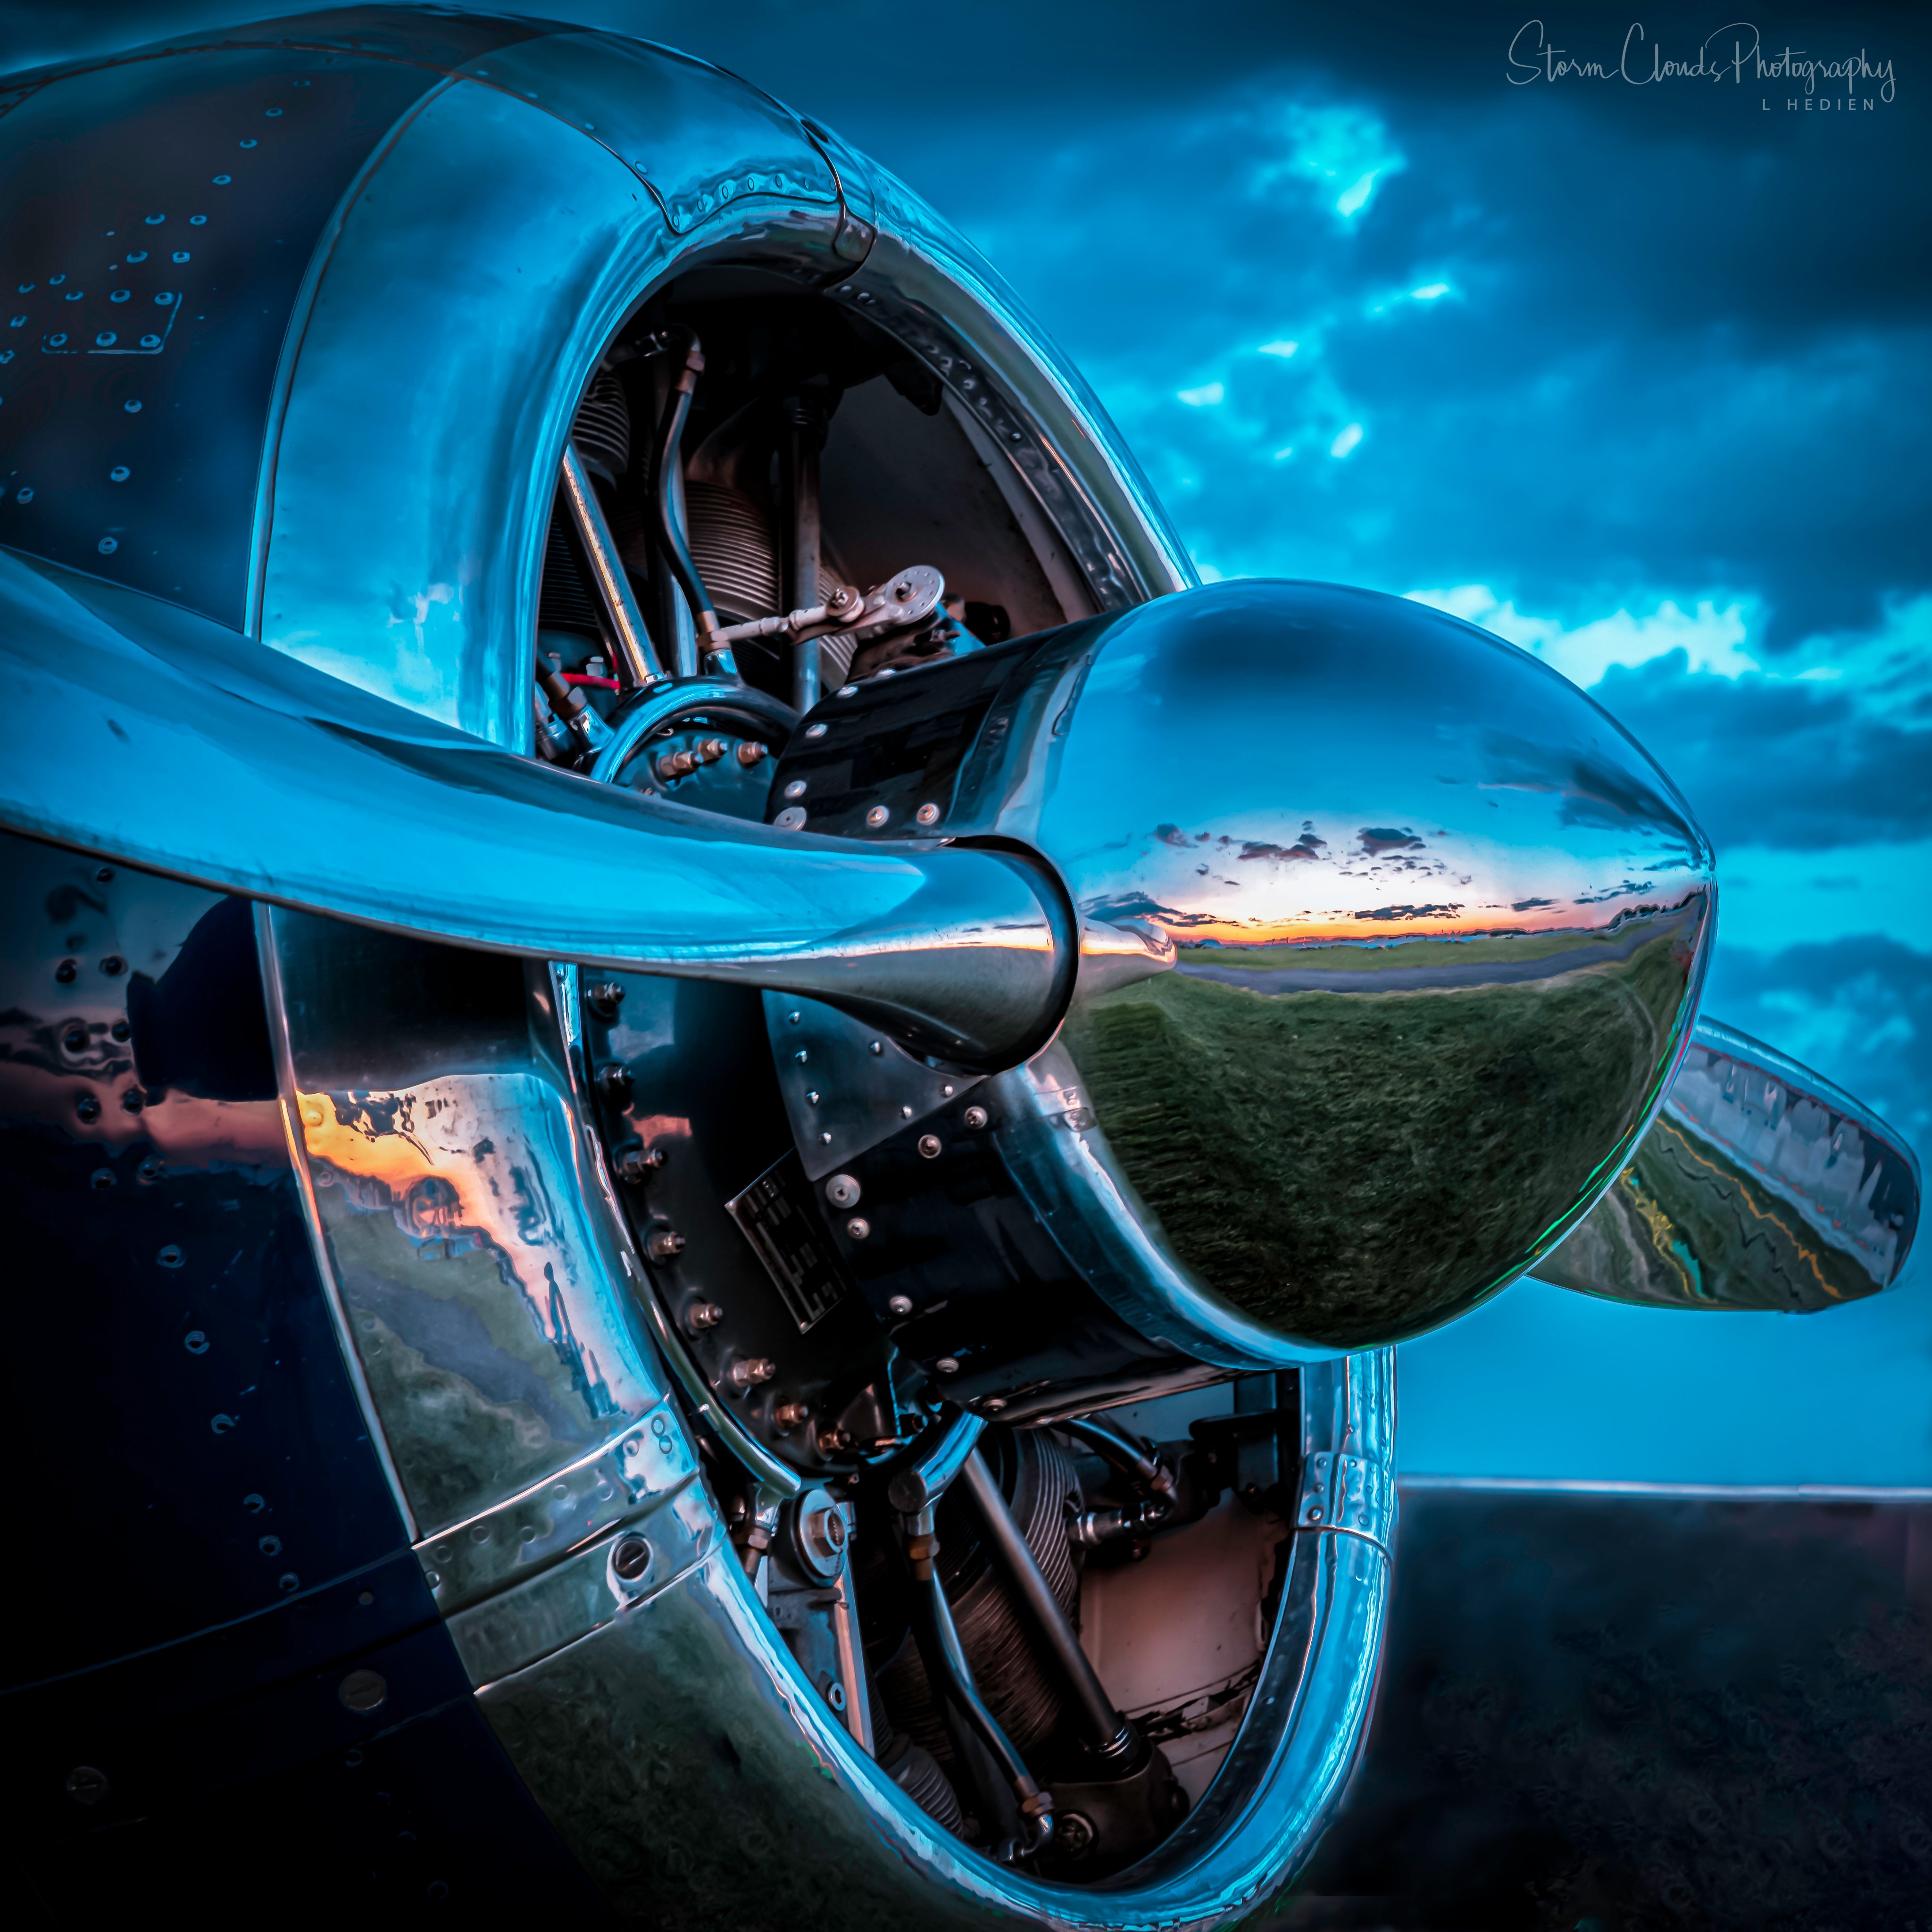 3rd Place Sunset reflection on the nose of a vintage aircraft by Laura Hedien @lhedien